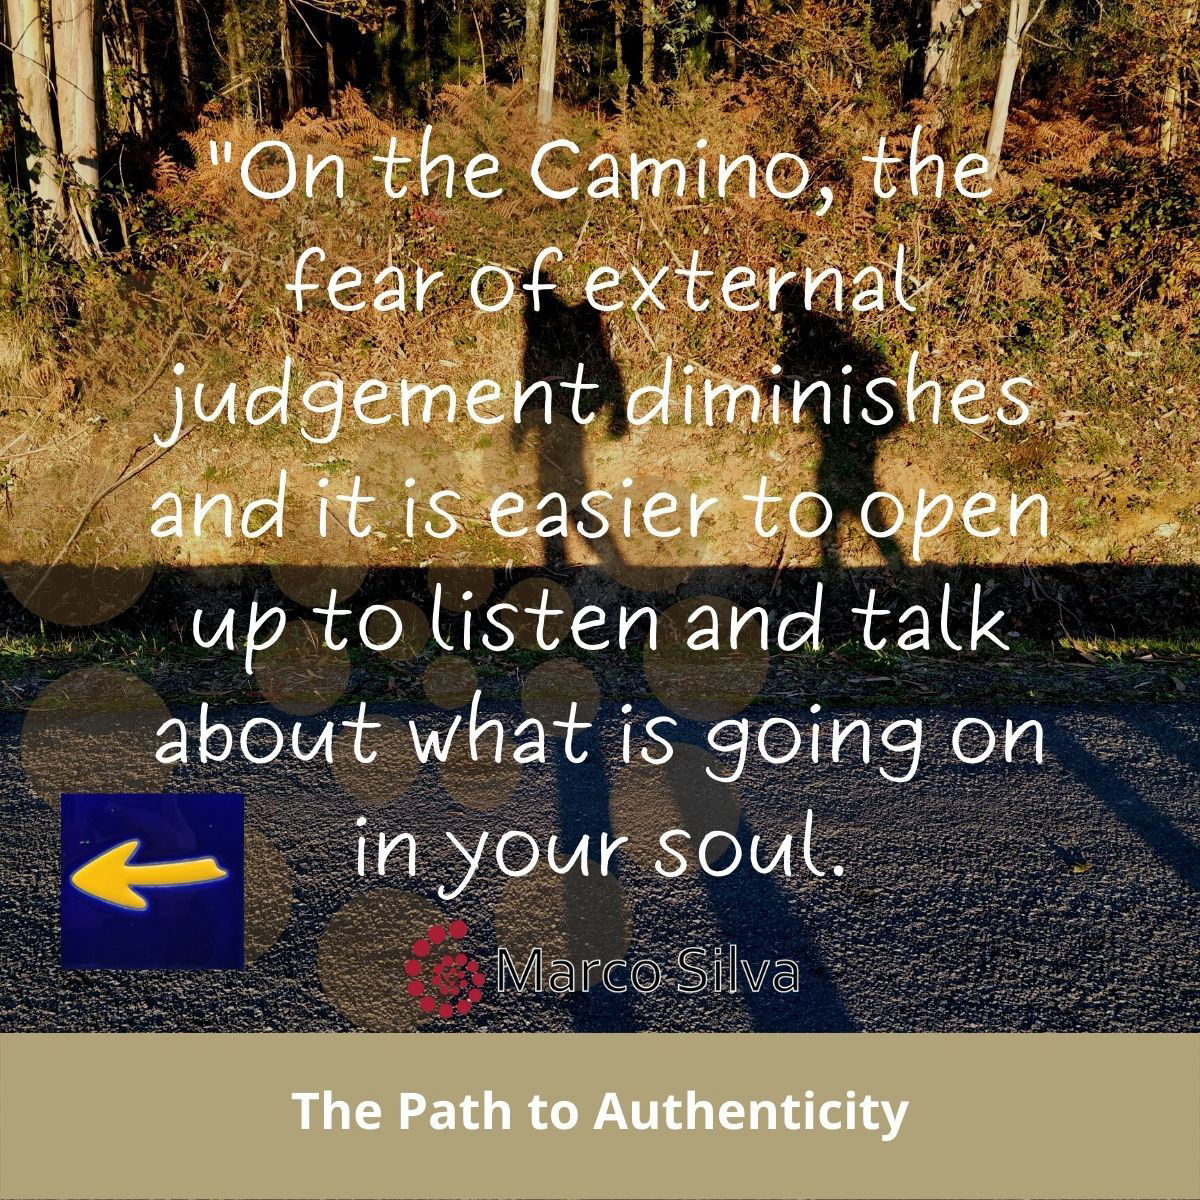 Marco Silva Coaching Blog - the path to authenticity